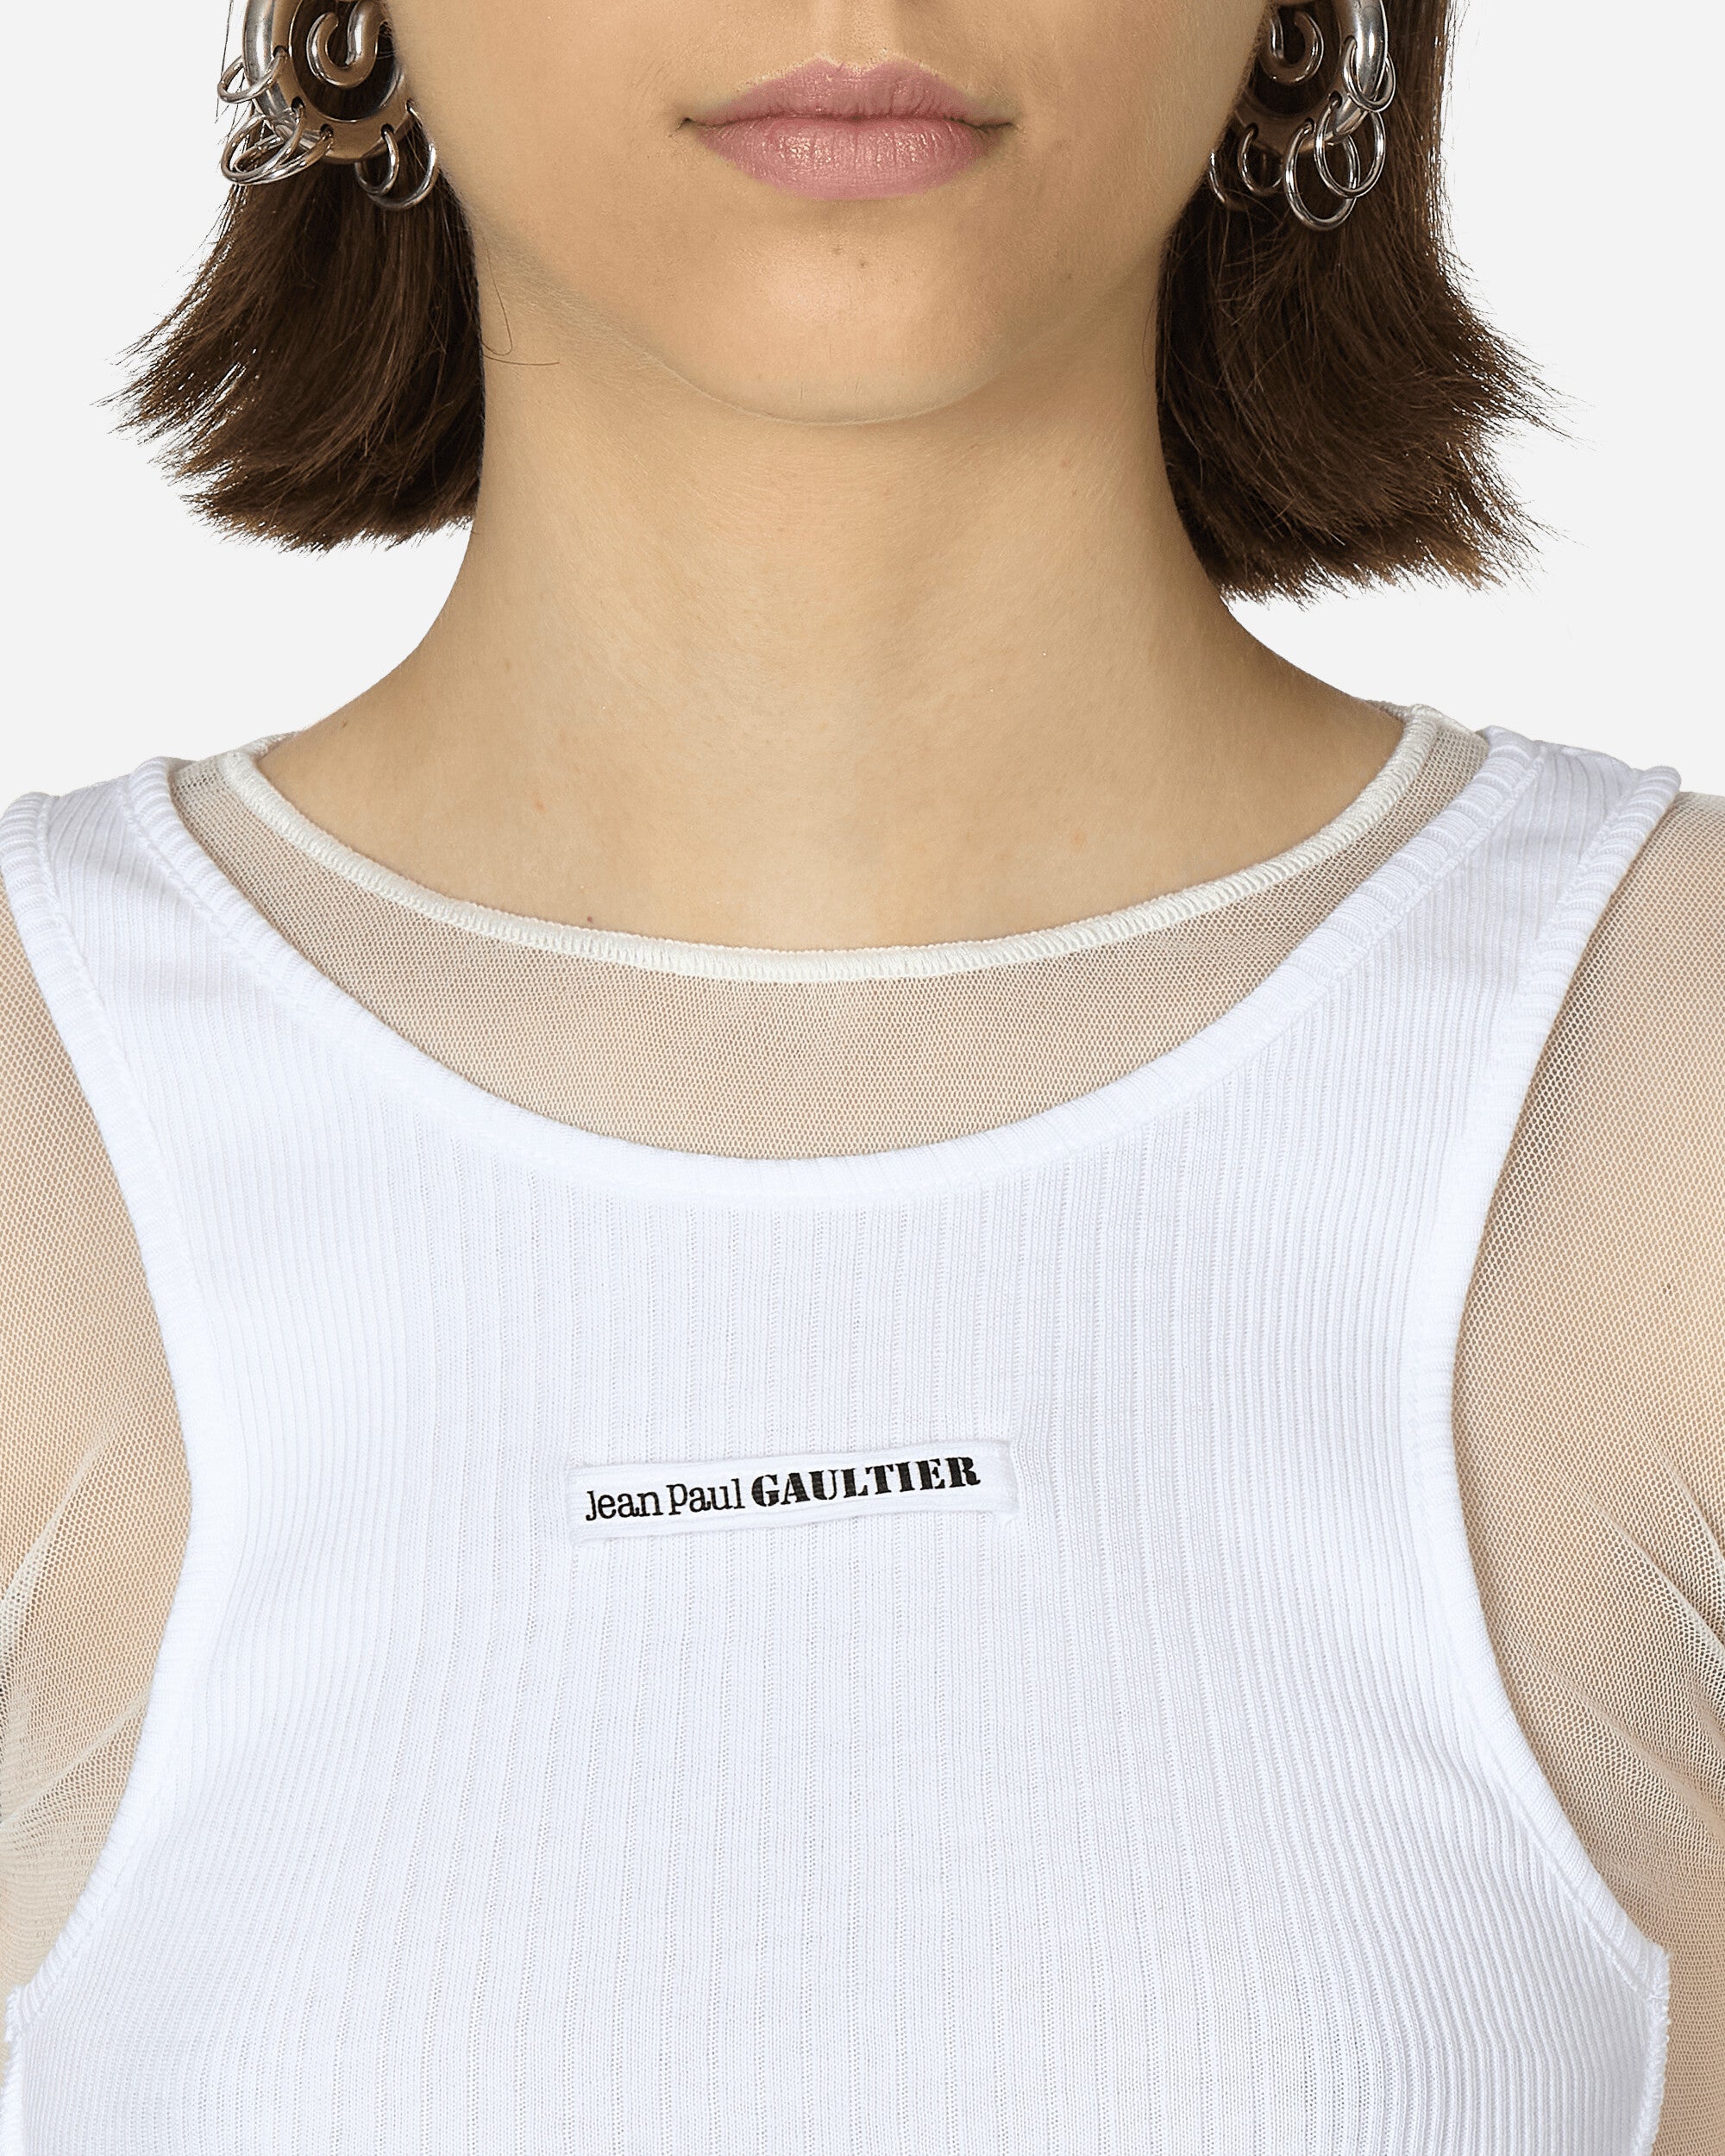 Jean Paul Gaultier Wmns Mesh Top With Rib White T-Shirts Longsleeve TO193B-T001 0101